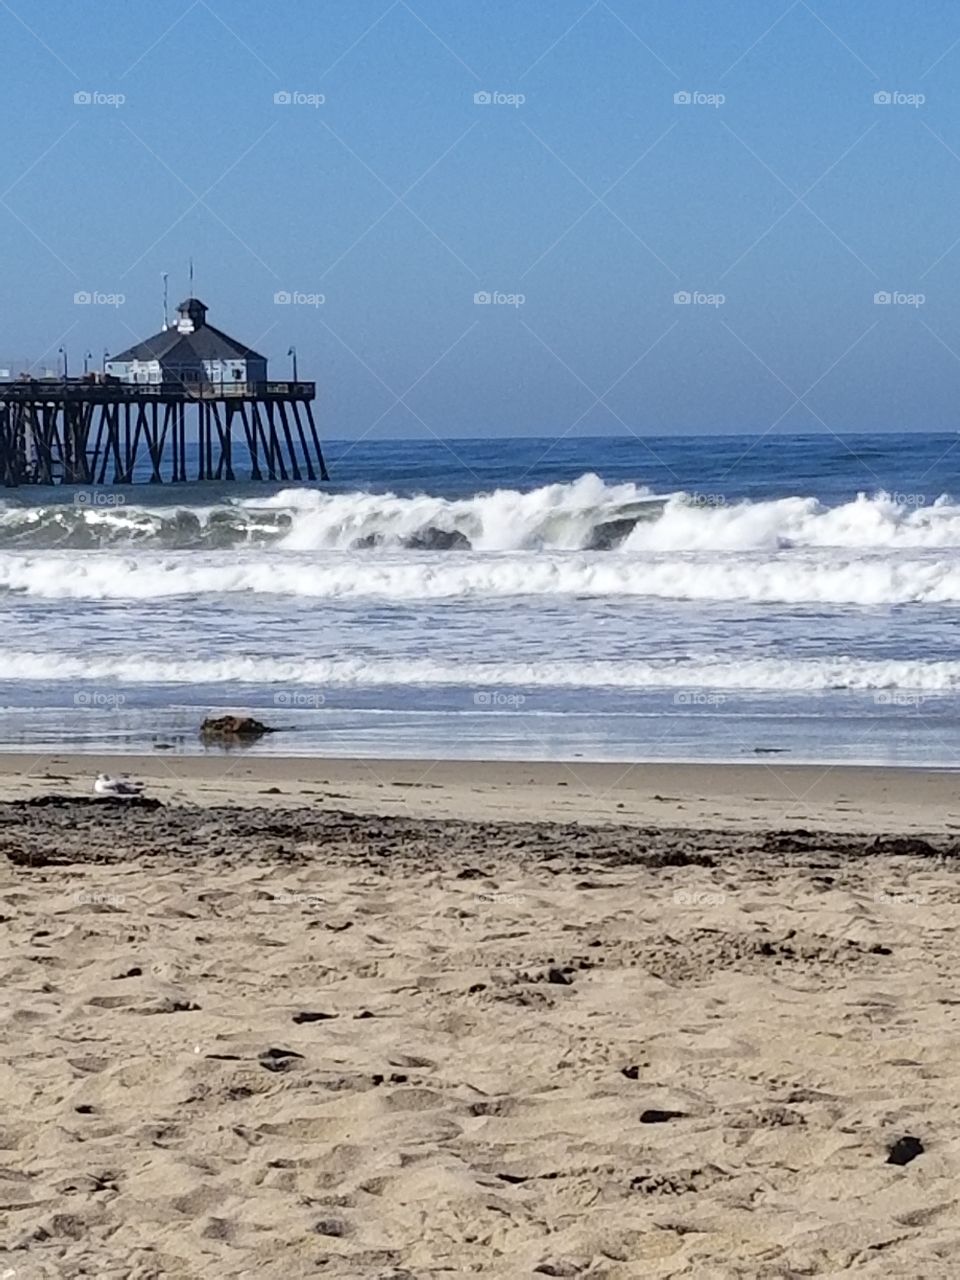 Wave watching in Imperial Beach, California